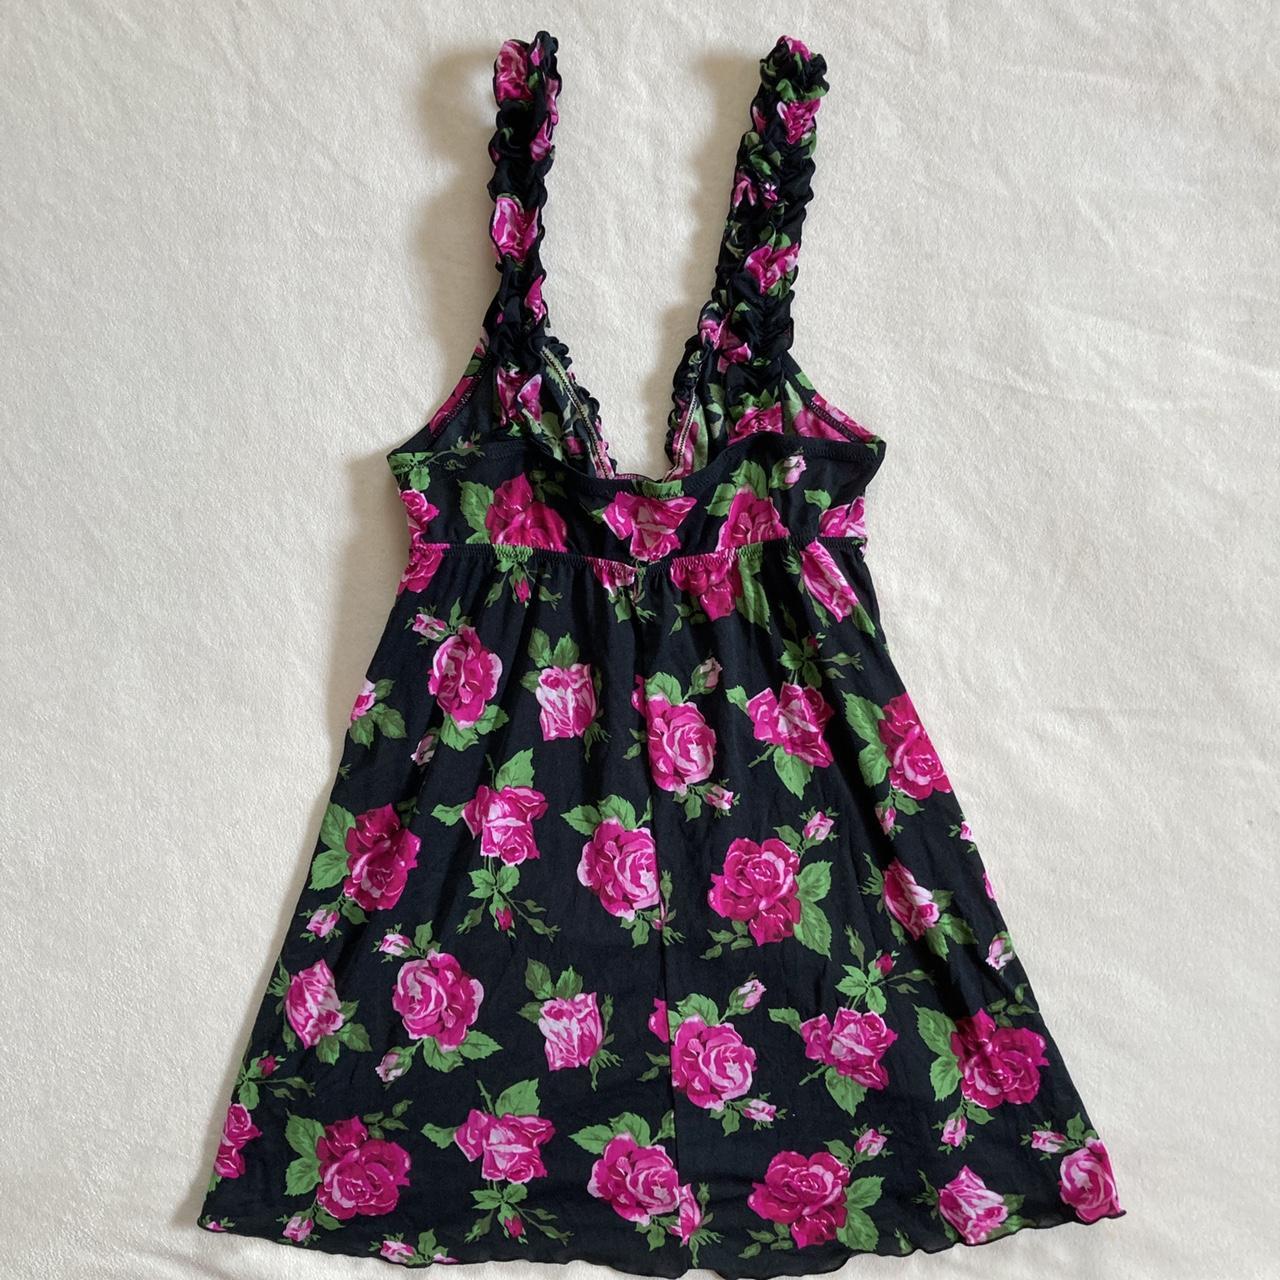 Product Image 3 - Frilly Floral Slip Dress

A gorgeous